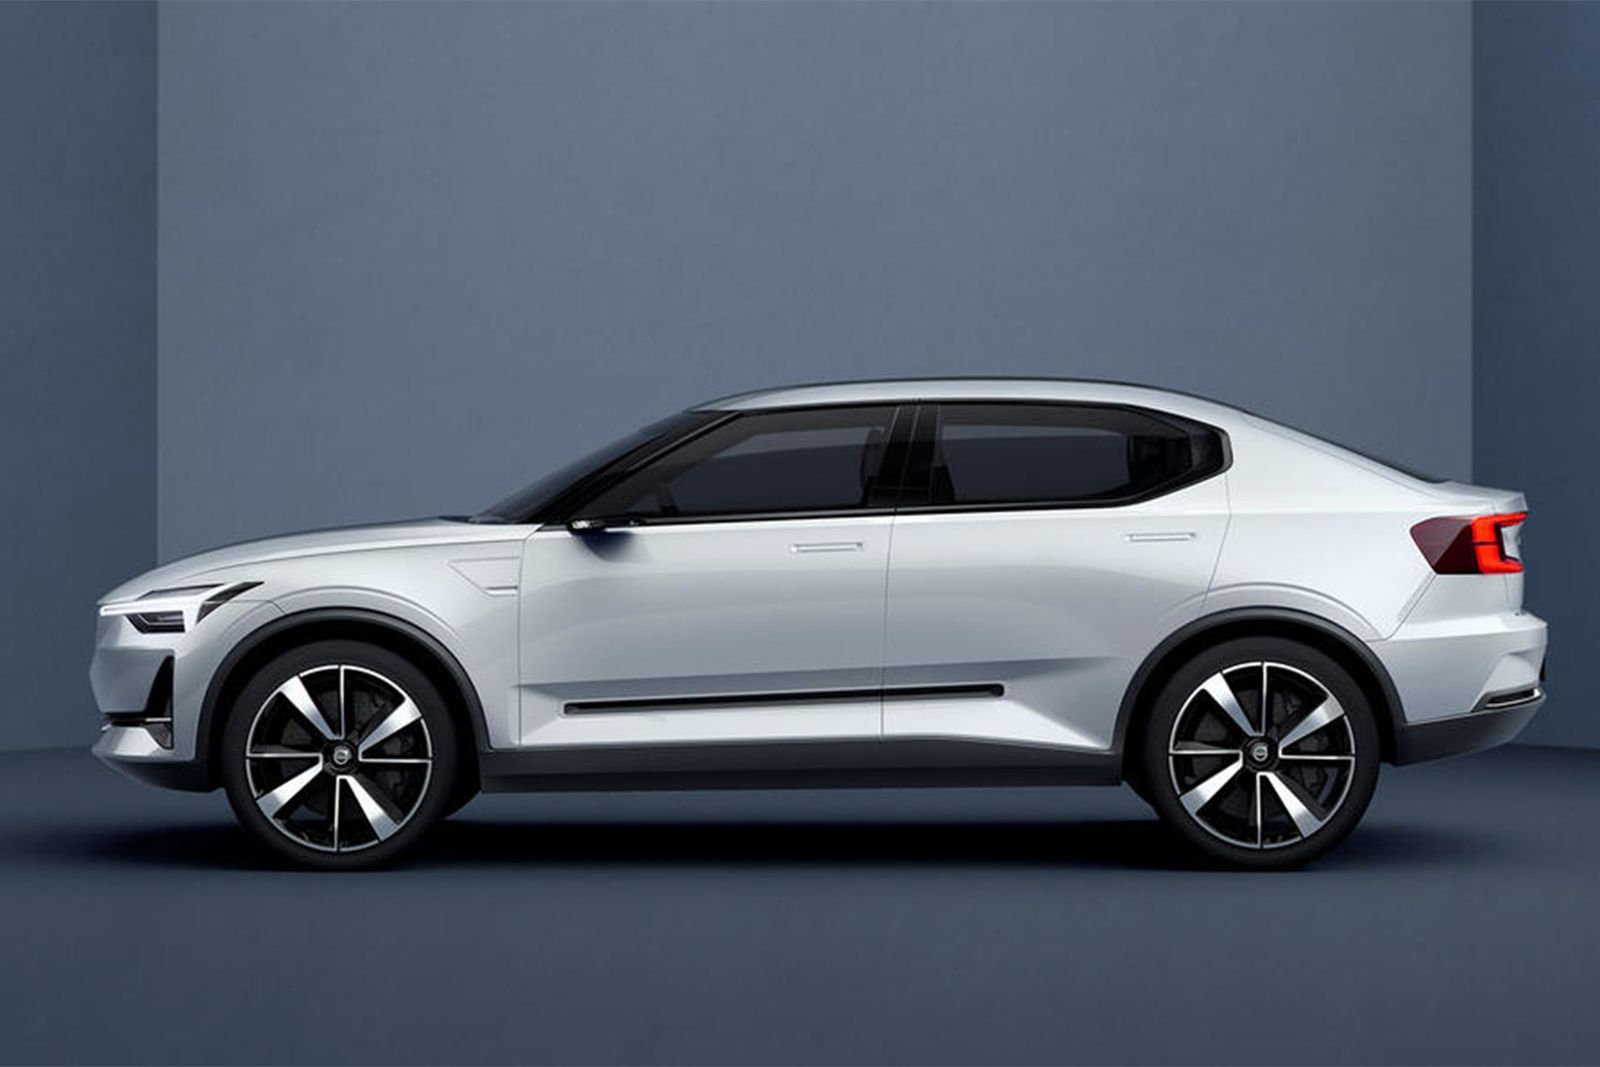 Volvos first all-electric car will be this sleek and sexy hatchback image 1